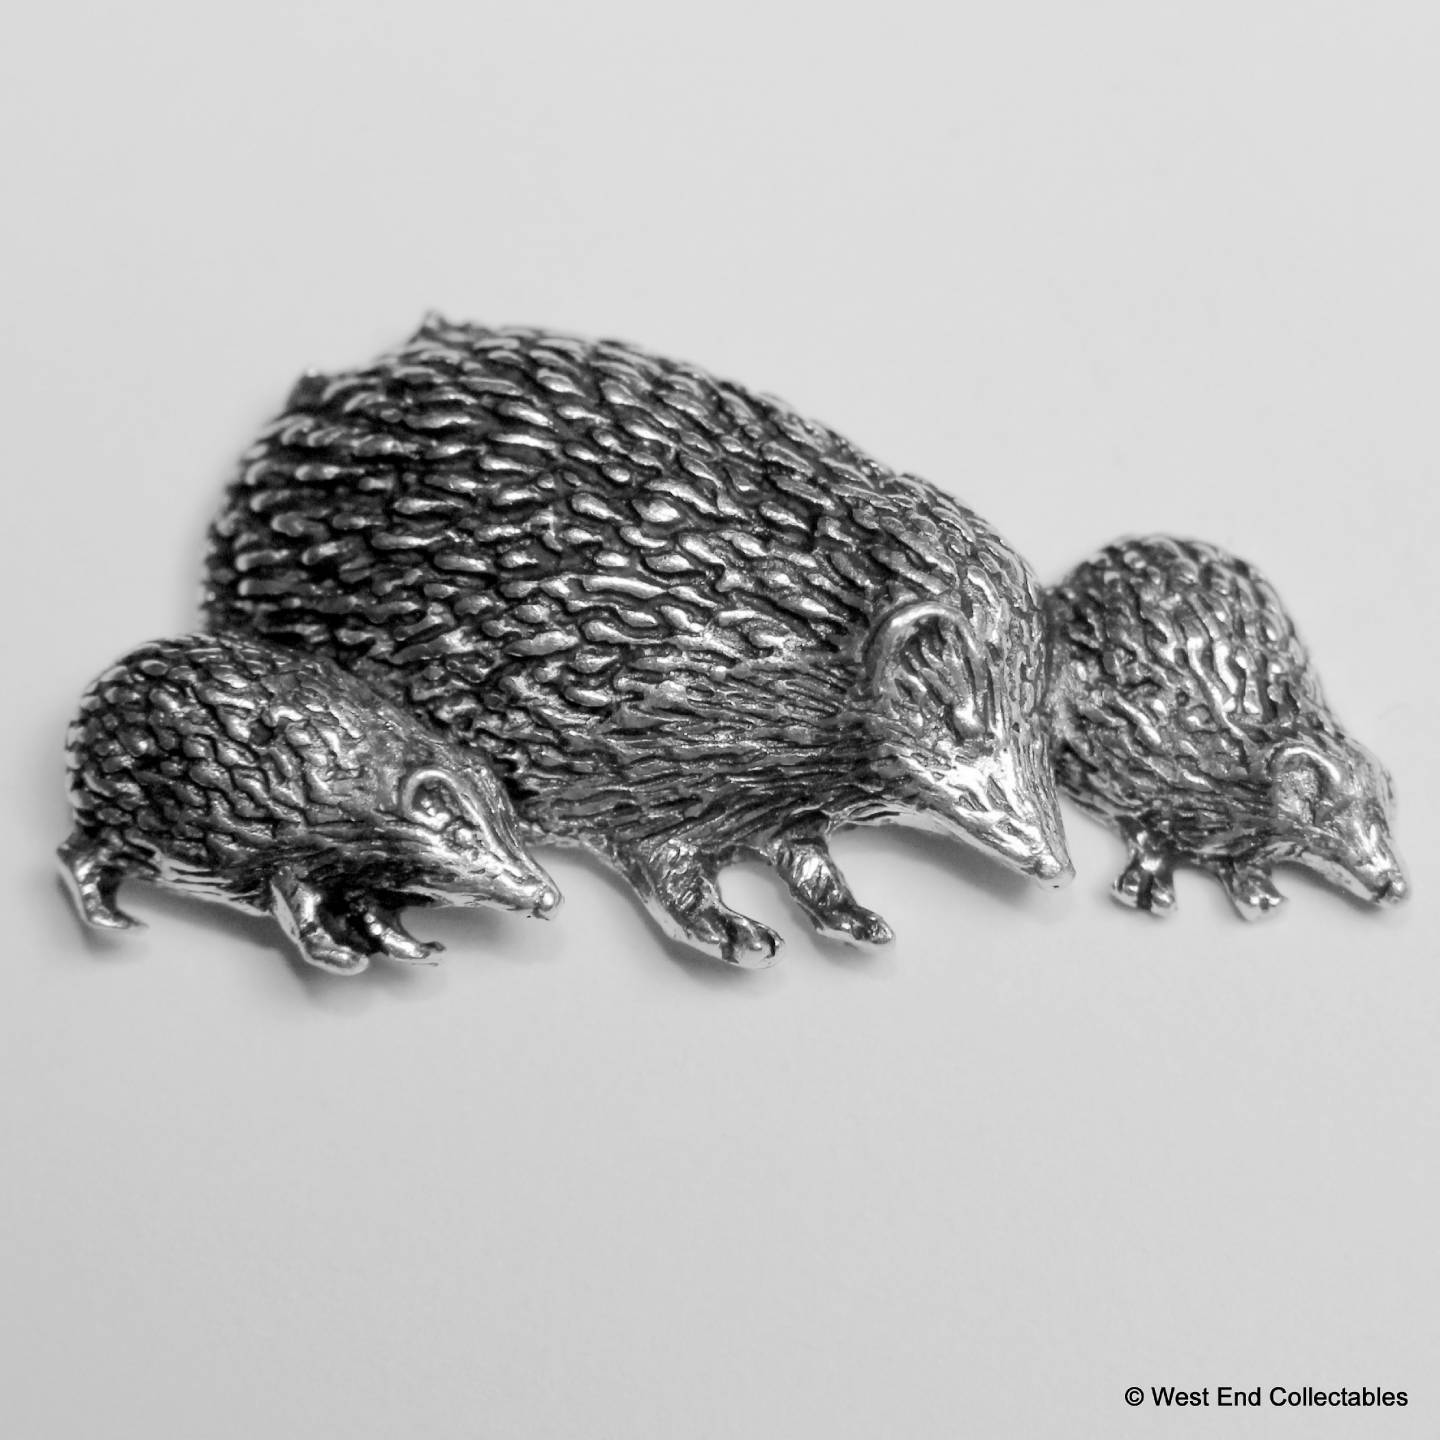 Hedgehog Family Pewter Pin Brooch - British Hand Crafted - Echidna, Porcupine